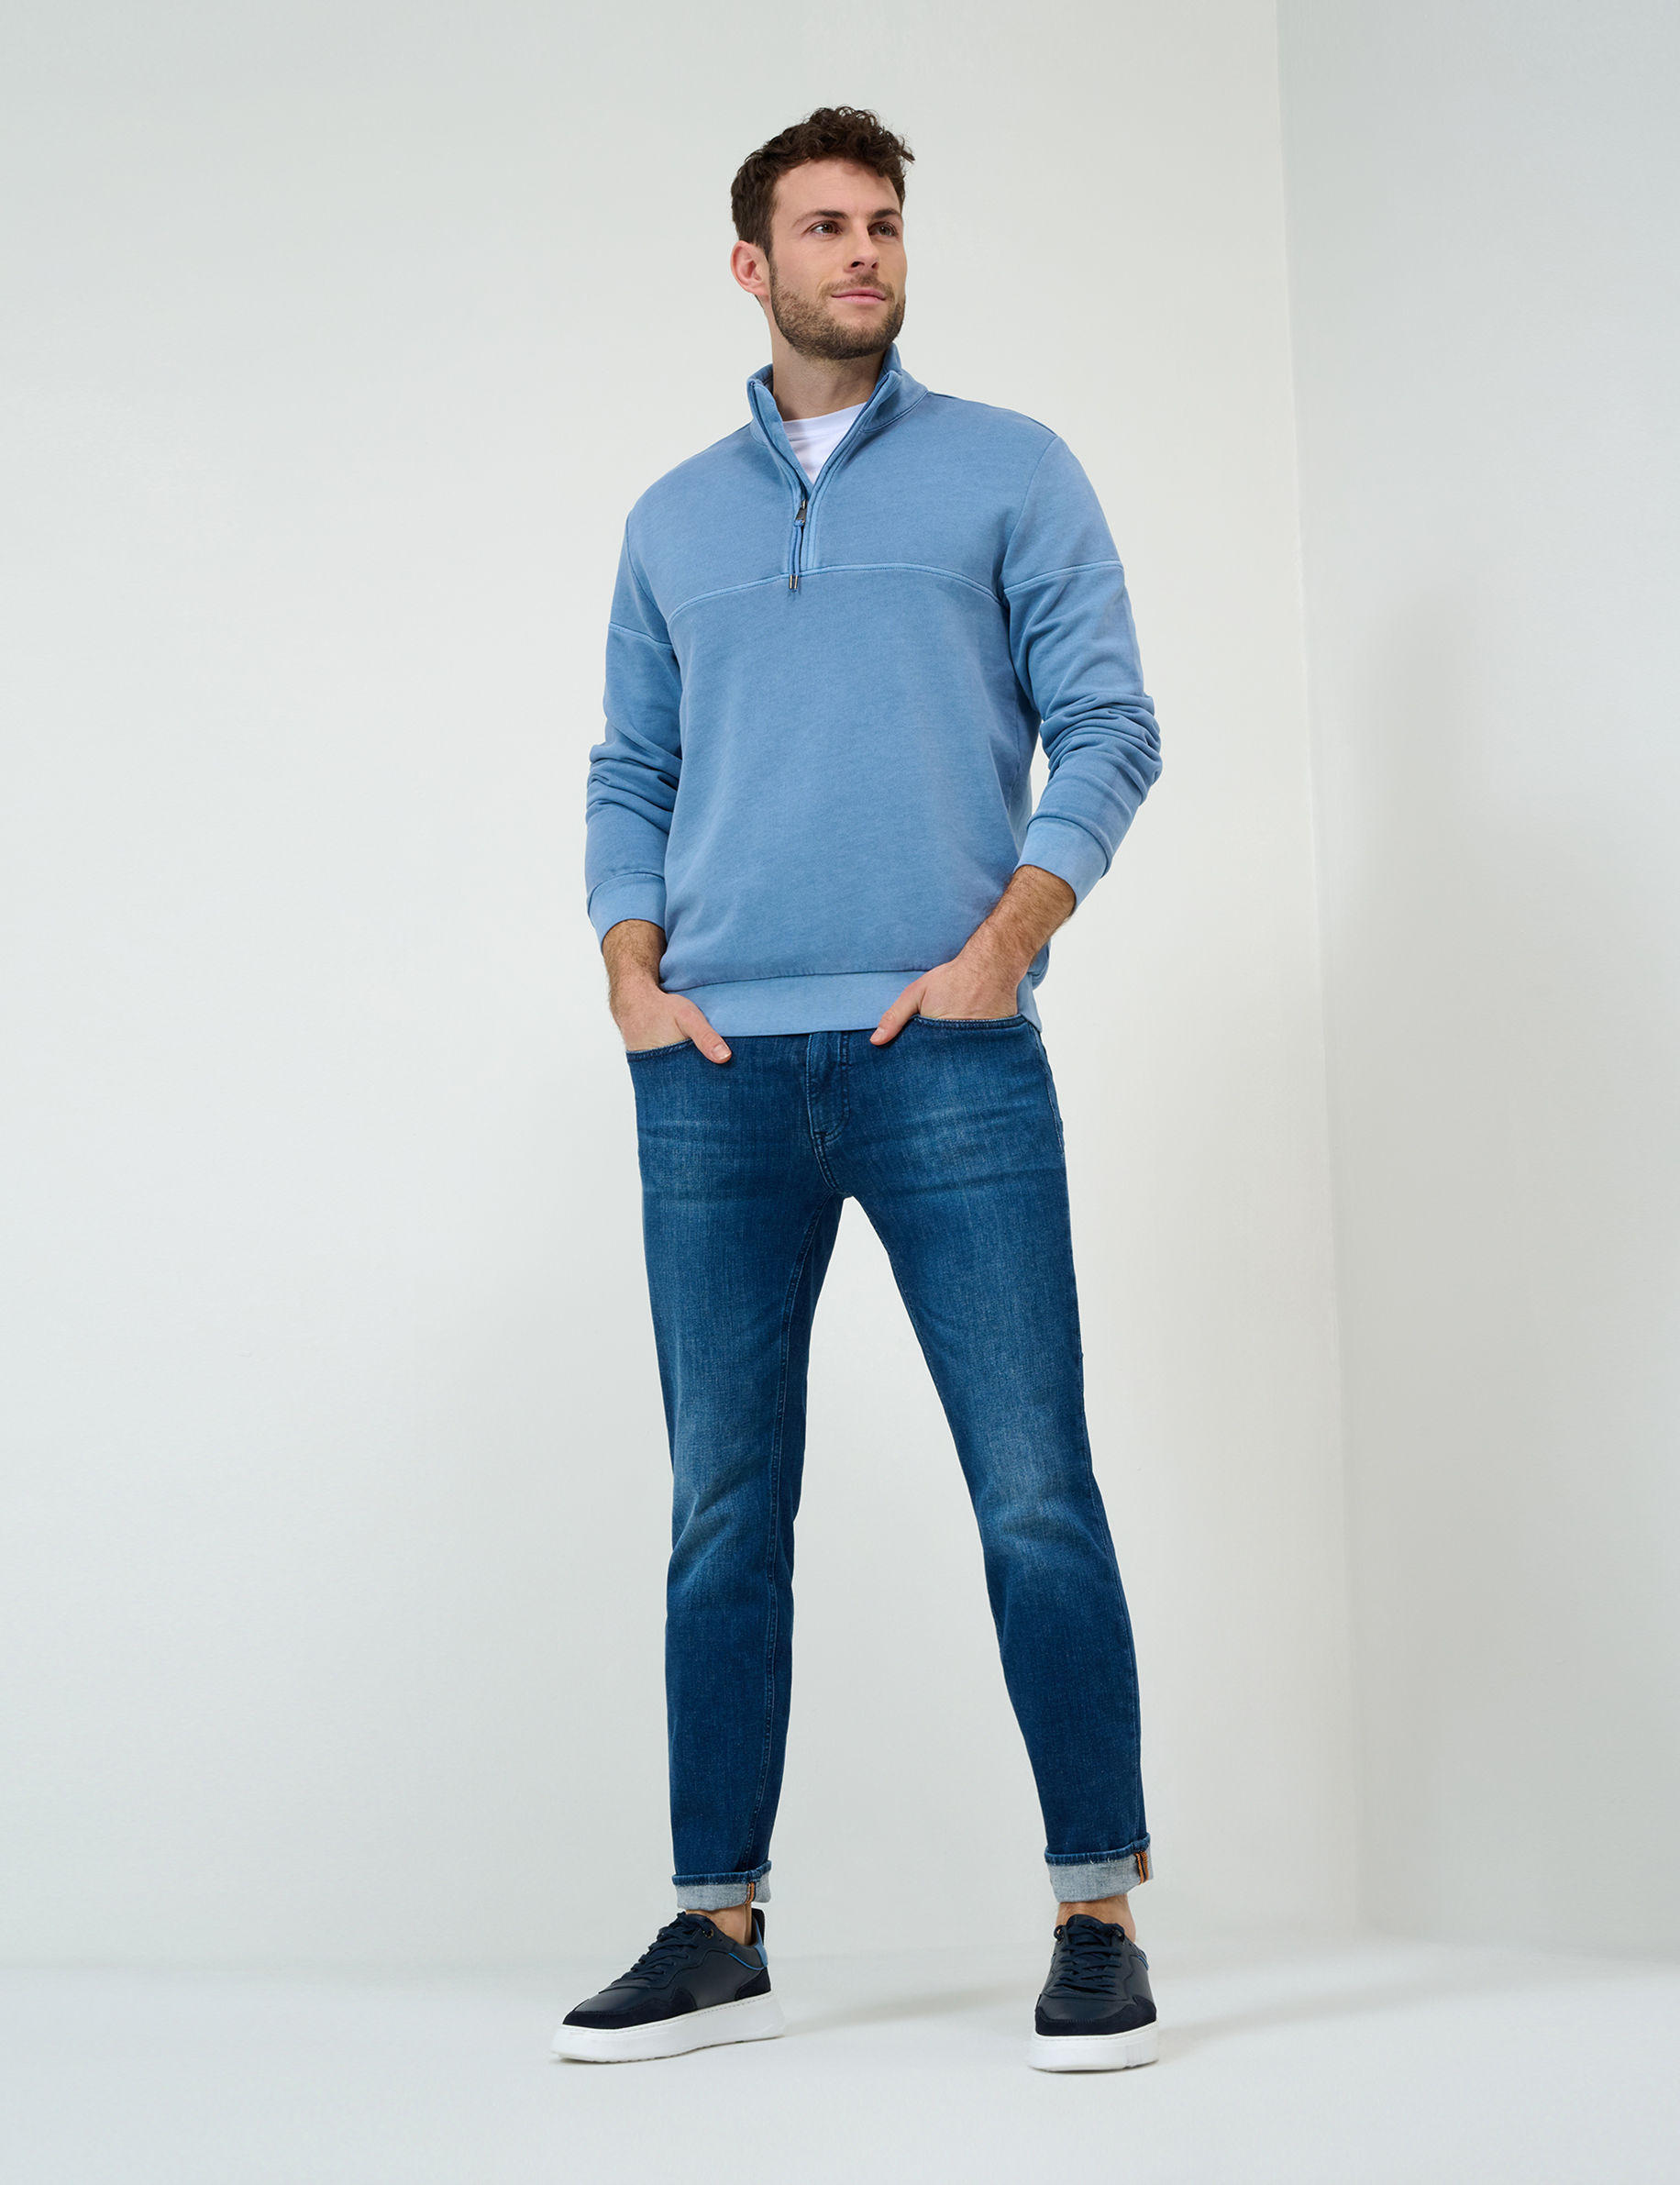 Men Style CHRIS WORN BLUE USED Slim Fit Model Outfit